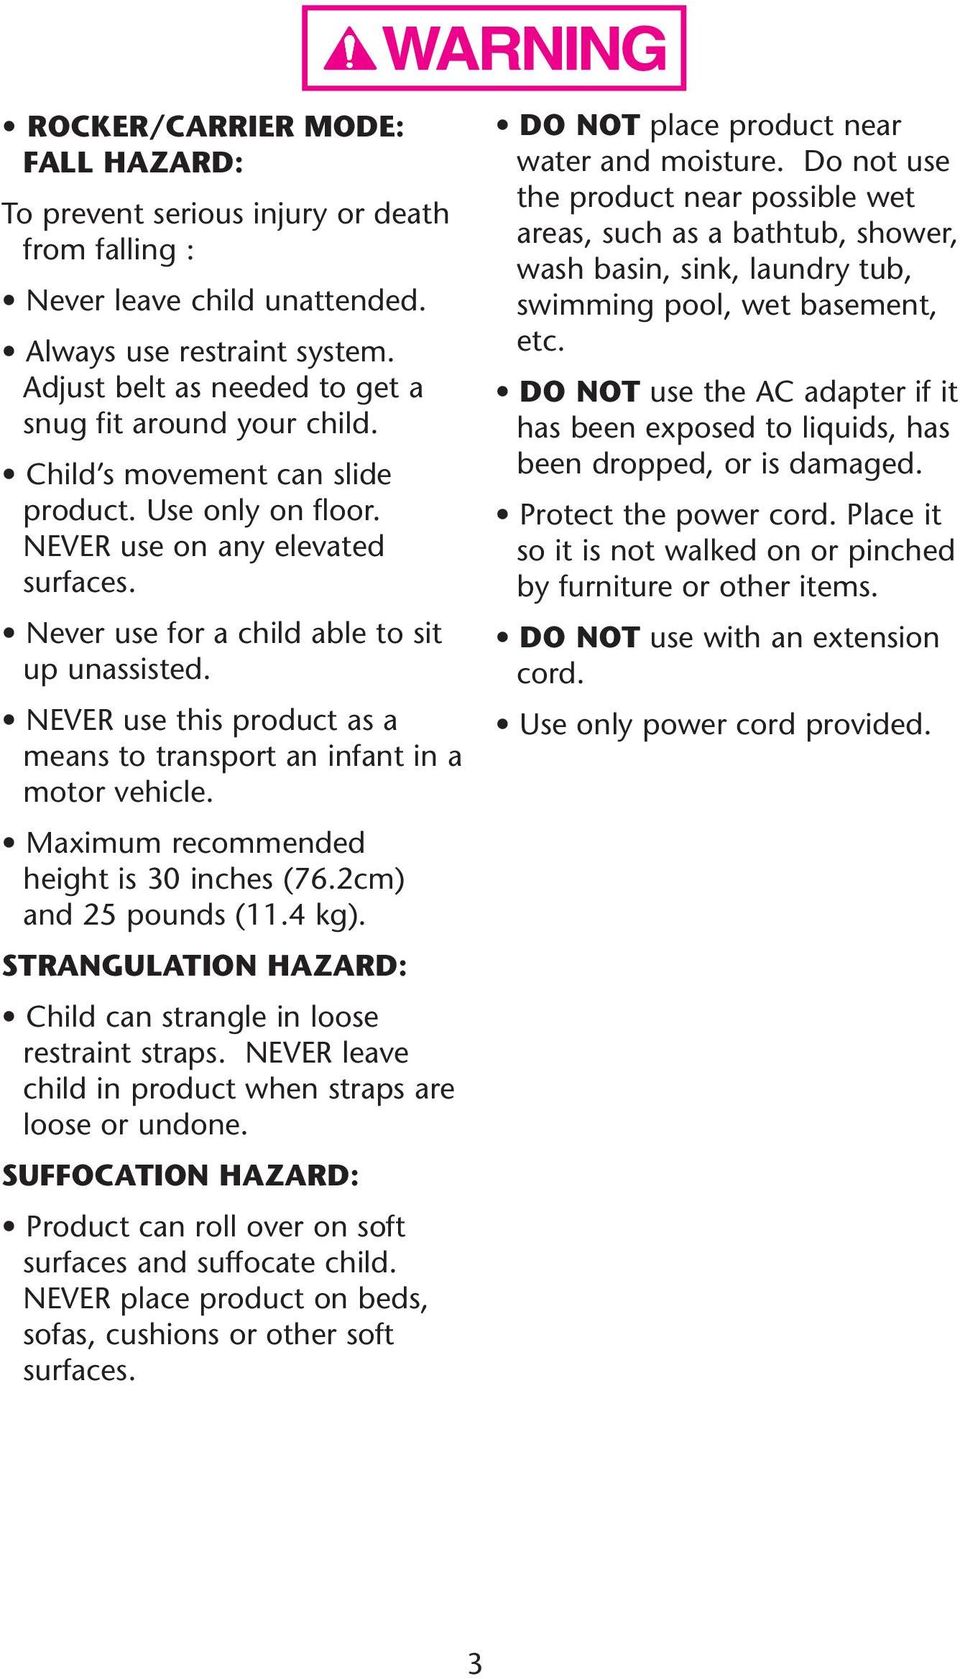 SUFFOCATION HAZARD: surfaces and suffocate child. sofas, cushions or other soft surfaces. DO NOT place product near etc.